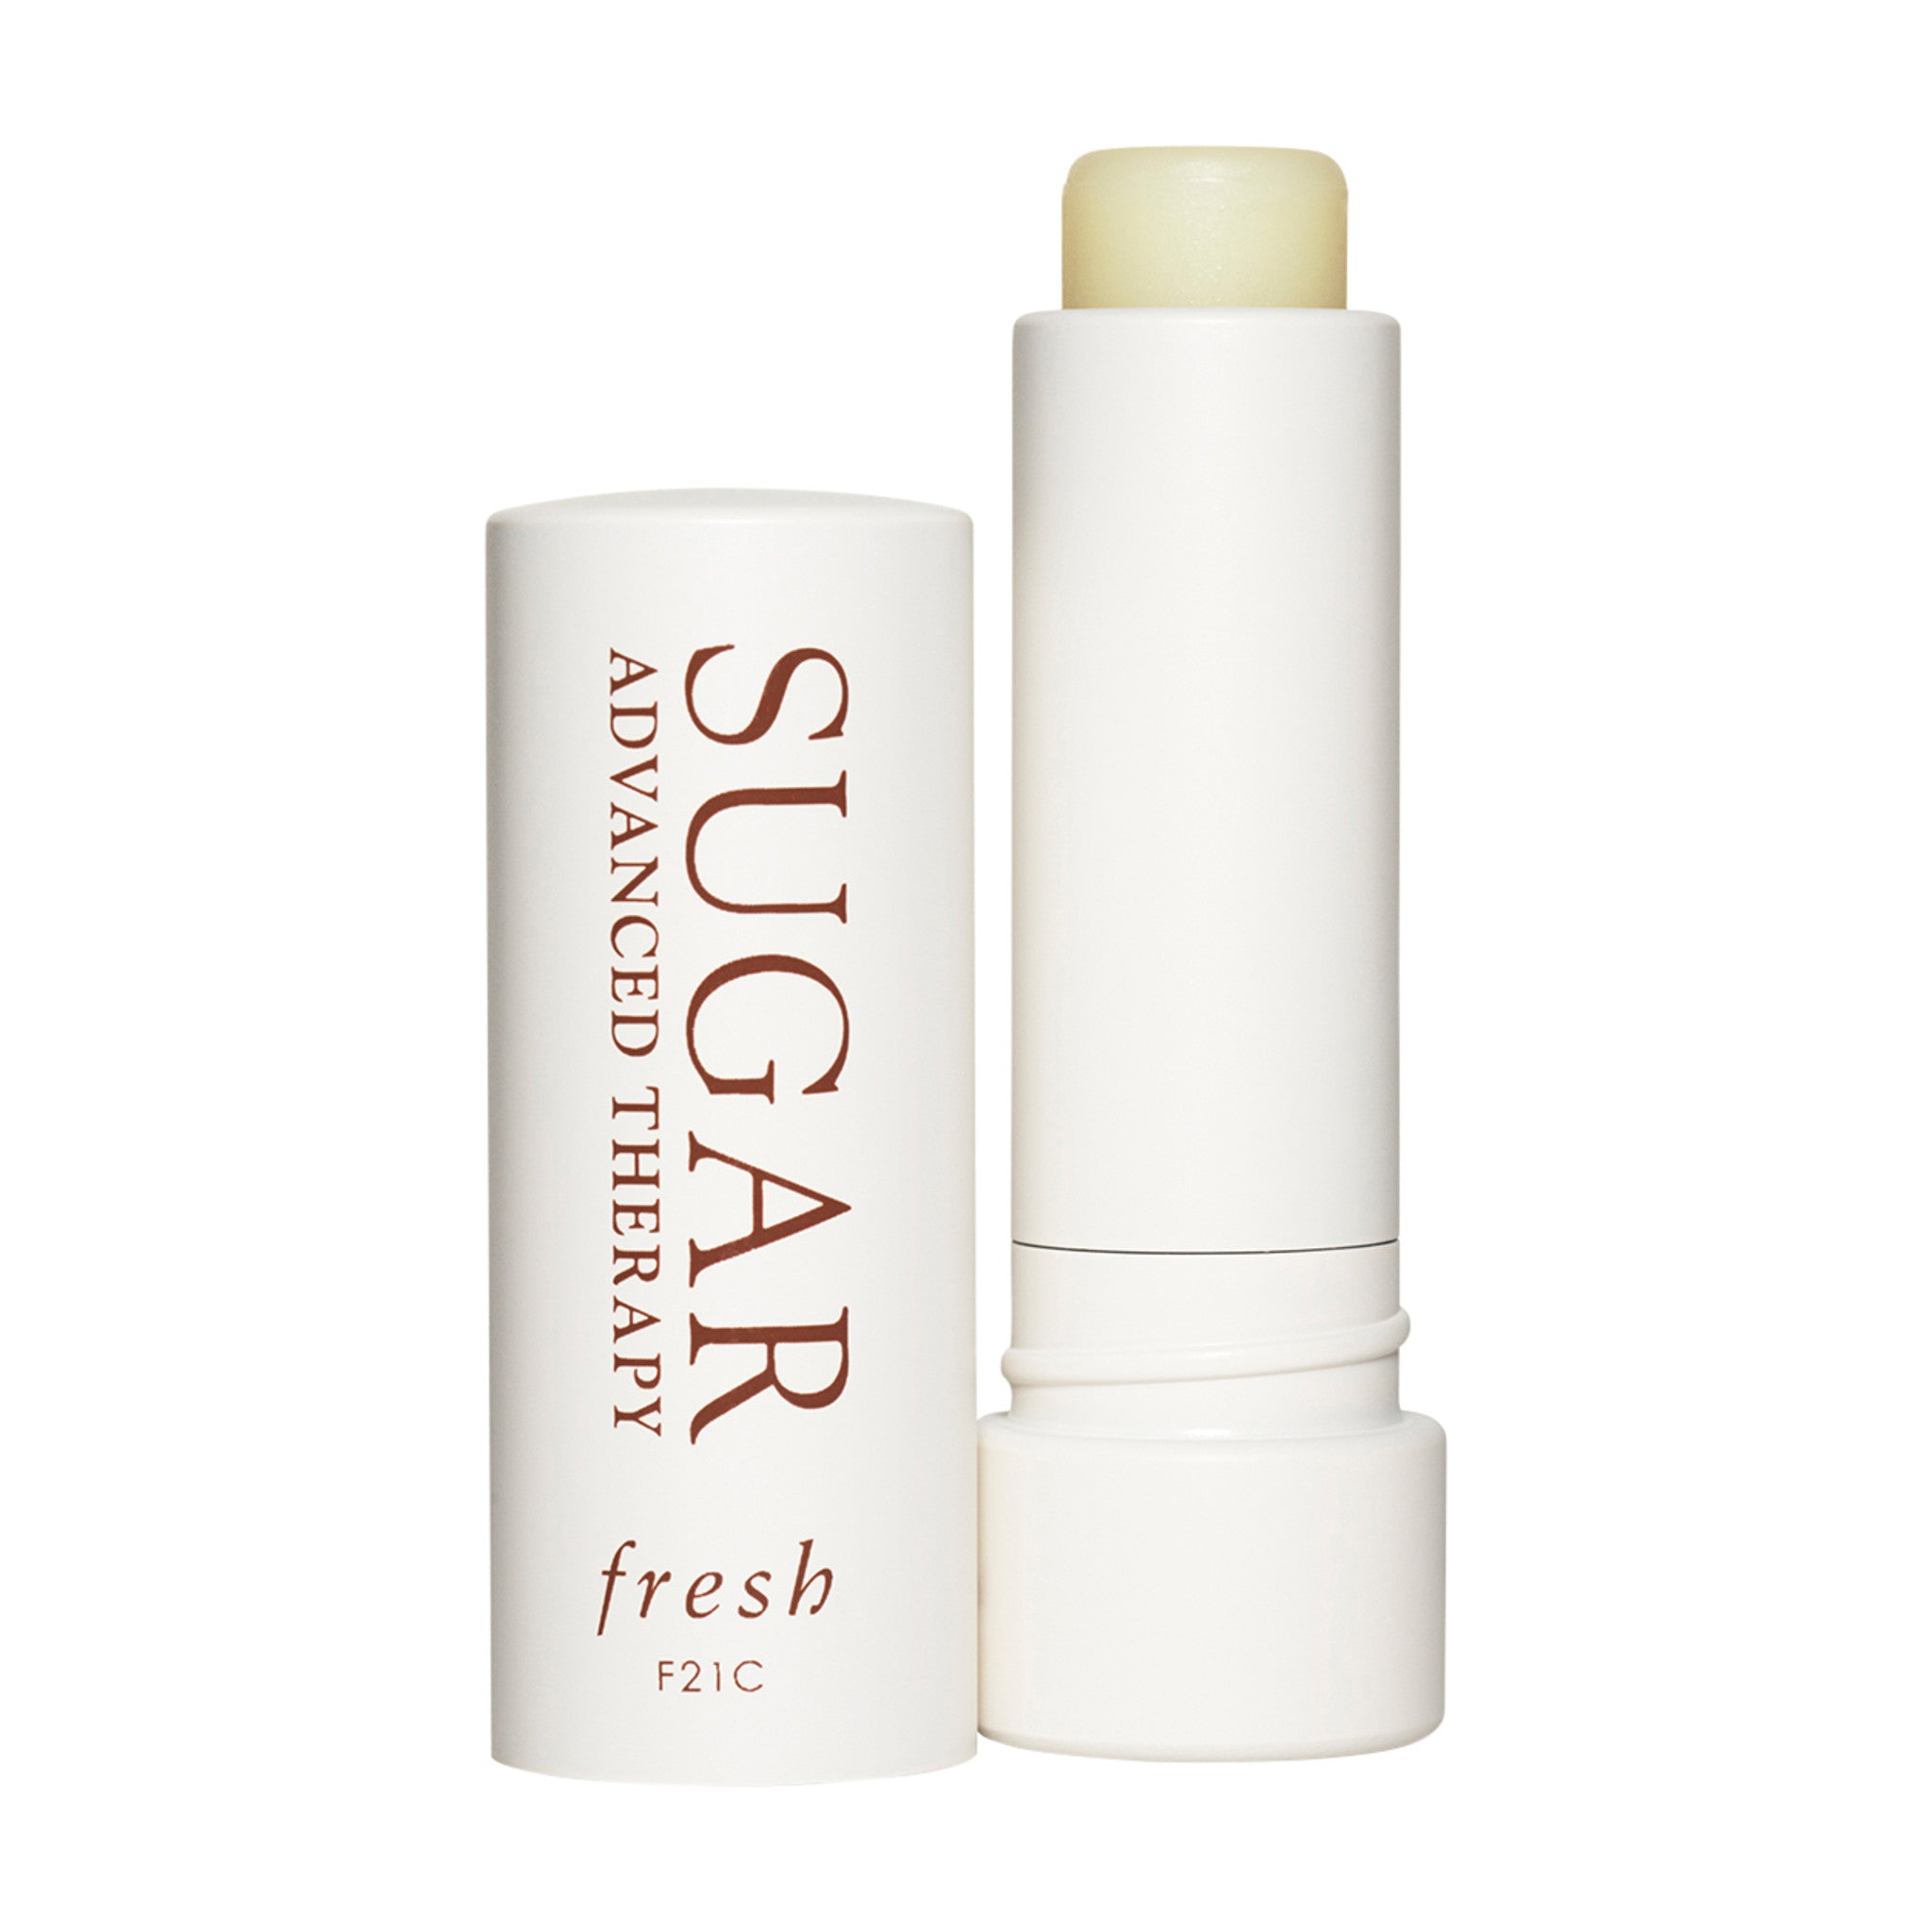 Fresh Sugar Lip Treatment Advanced Therapy main image. This product is in the color clear